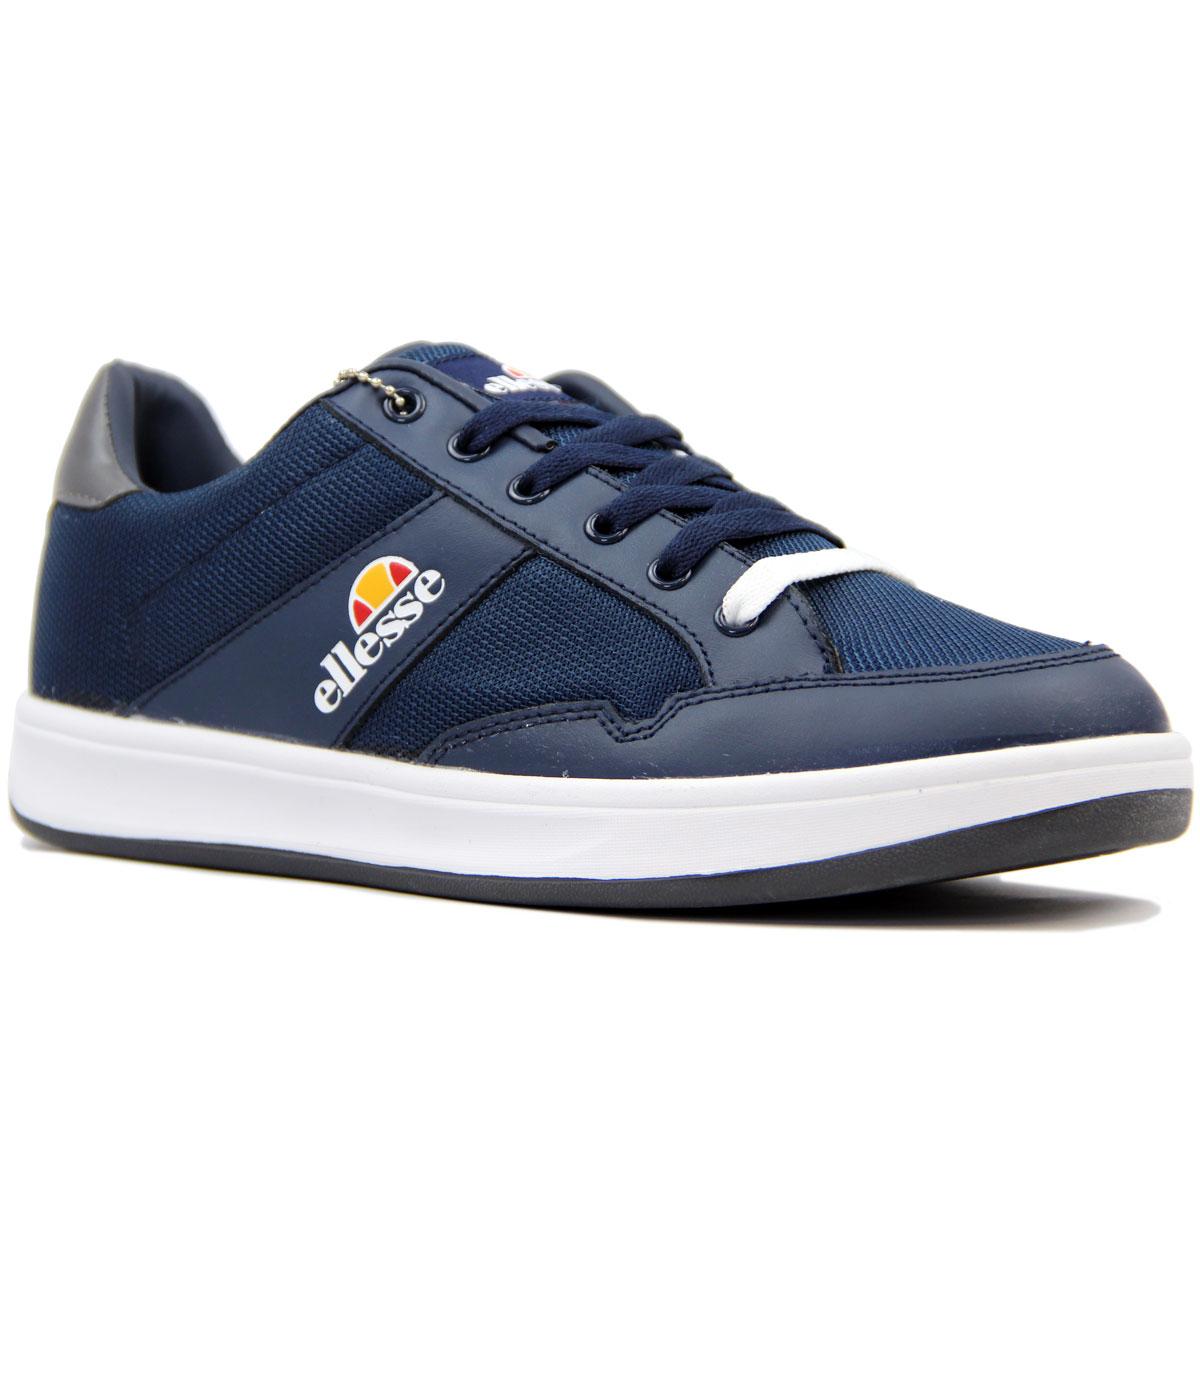 ELLESSE Pavia Retro 1980s Leather & Mesh Trainers in Navy